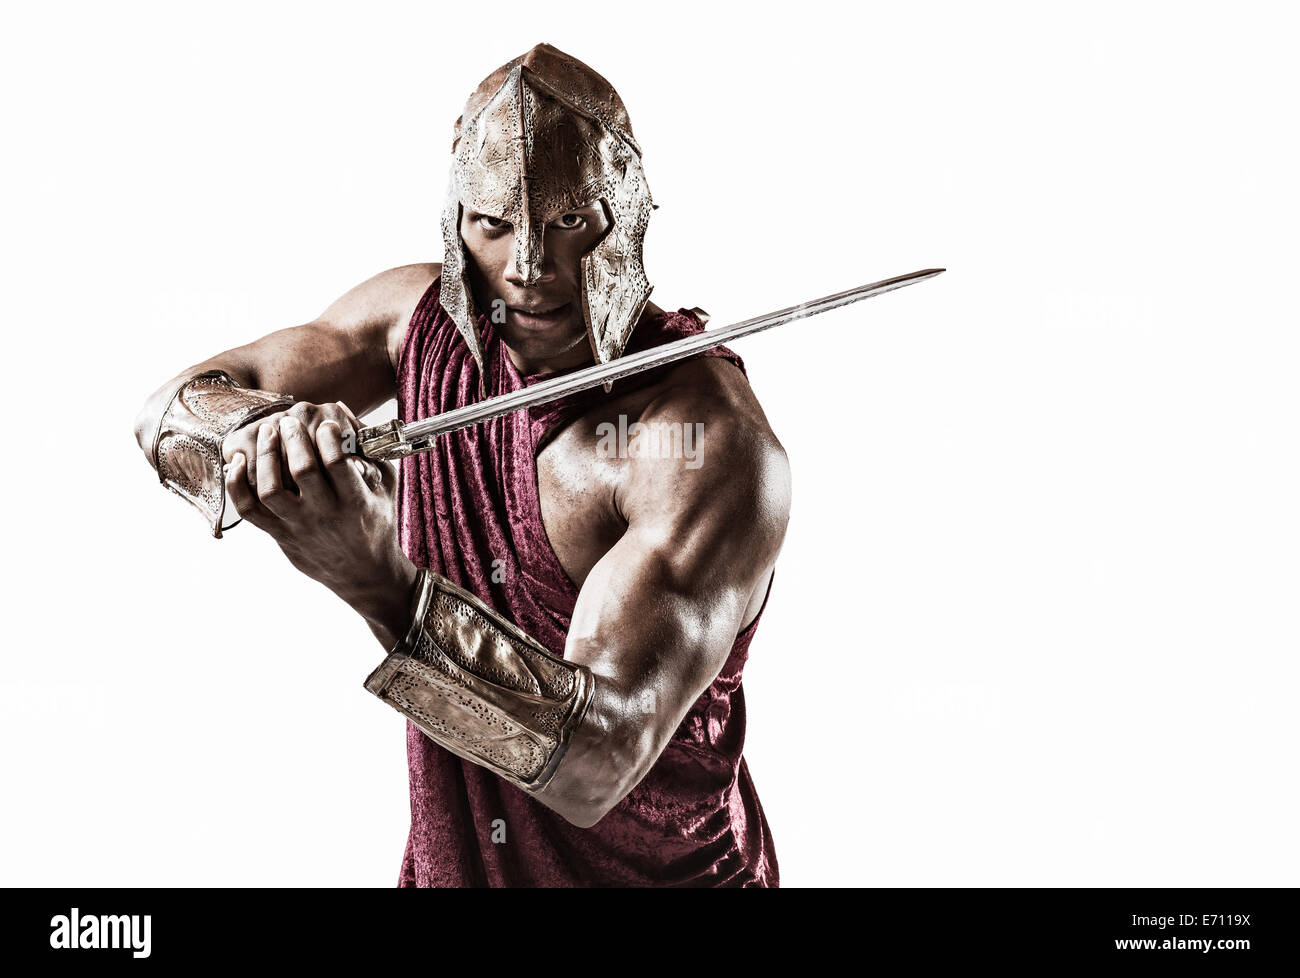 Studio portrait of muscular young man dressed as gladiator with helmet and sword Stock Photo